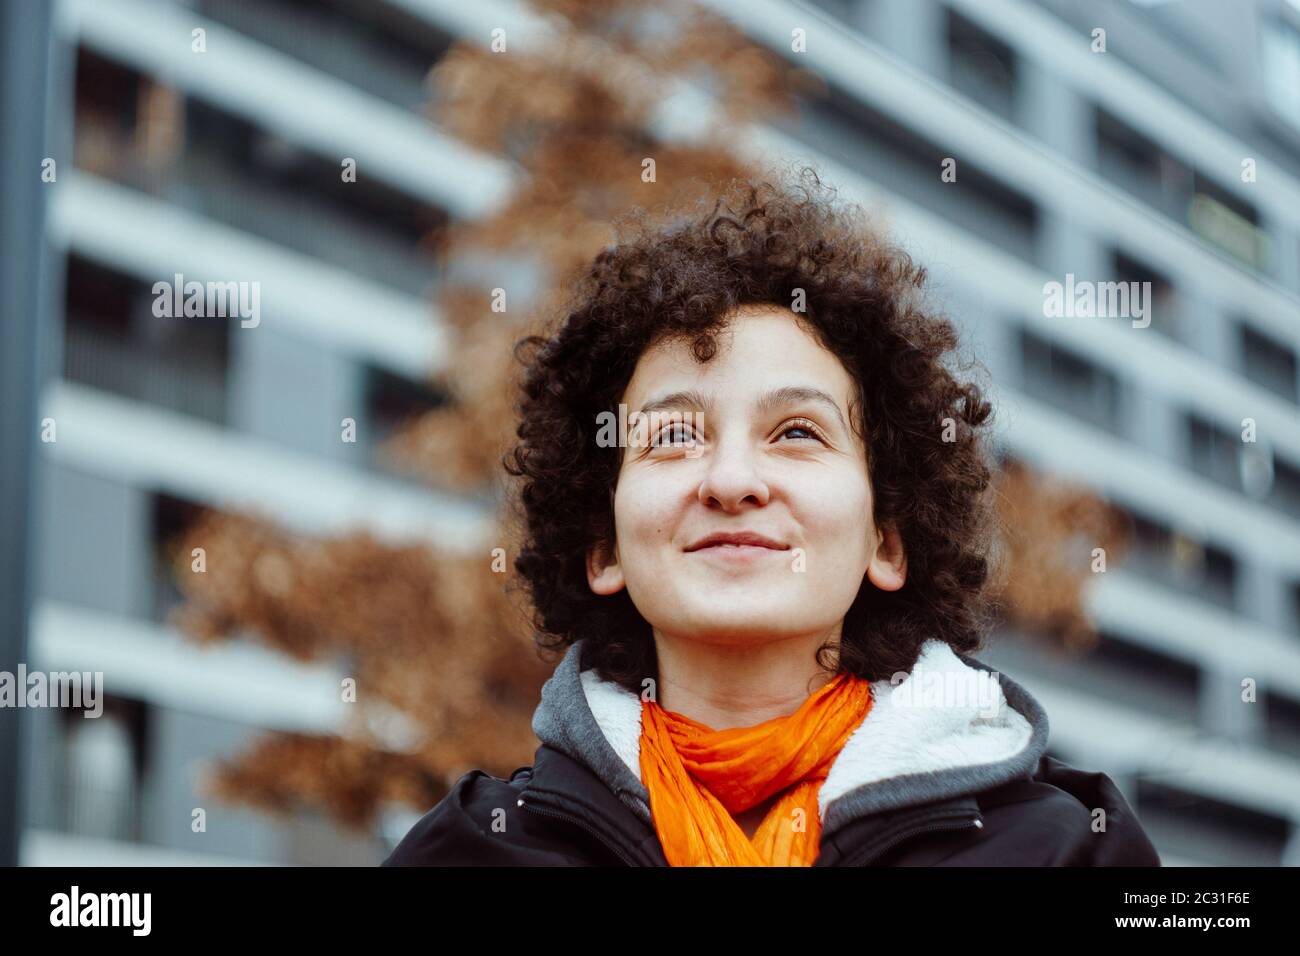 Young confident woman portrait outdoors. Analog film look. Authentic millenial young girl concept. Stock Photo